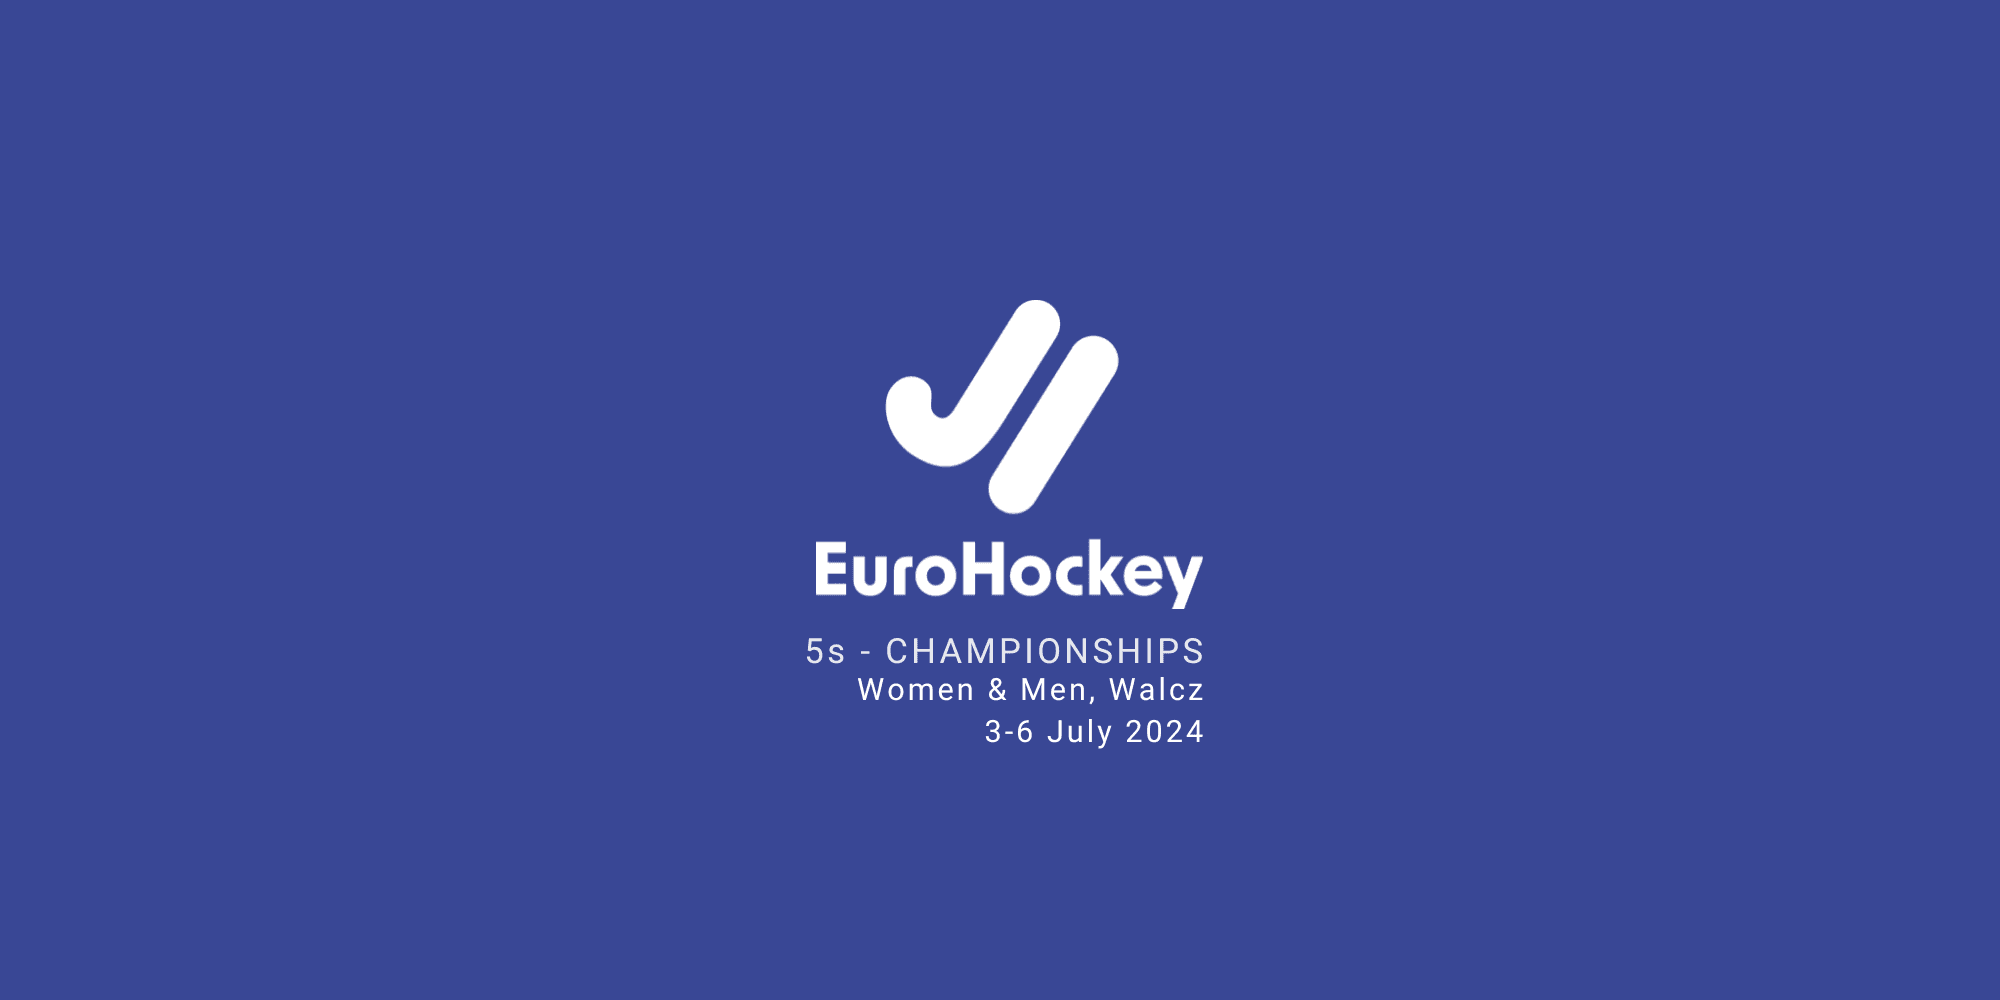 New faces hoping for EuroHockey 5s glory in women’s championship